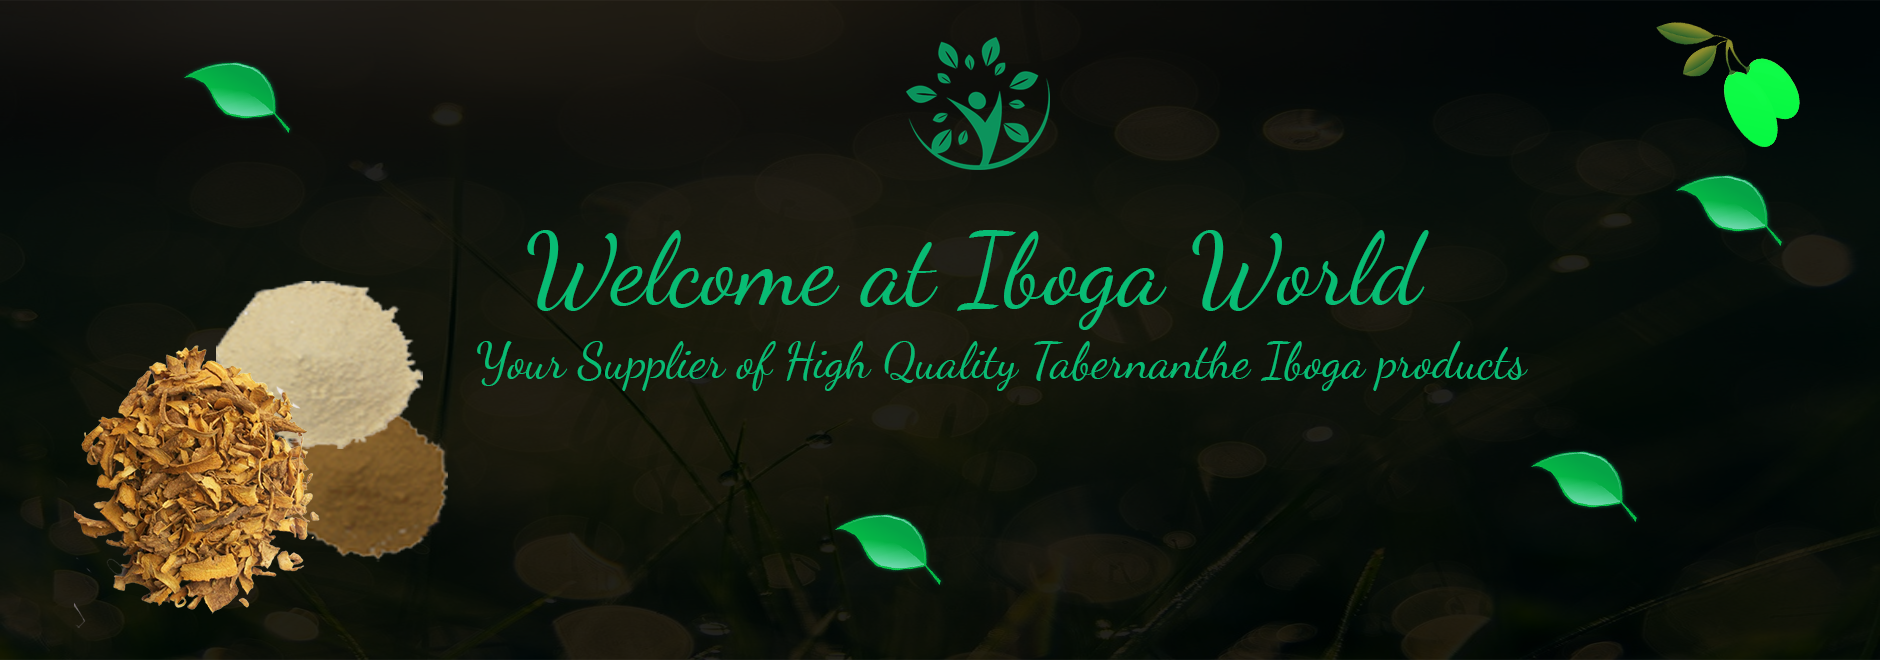 welcome at iboga world your supplier of high quality tabernanthe iboga products